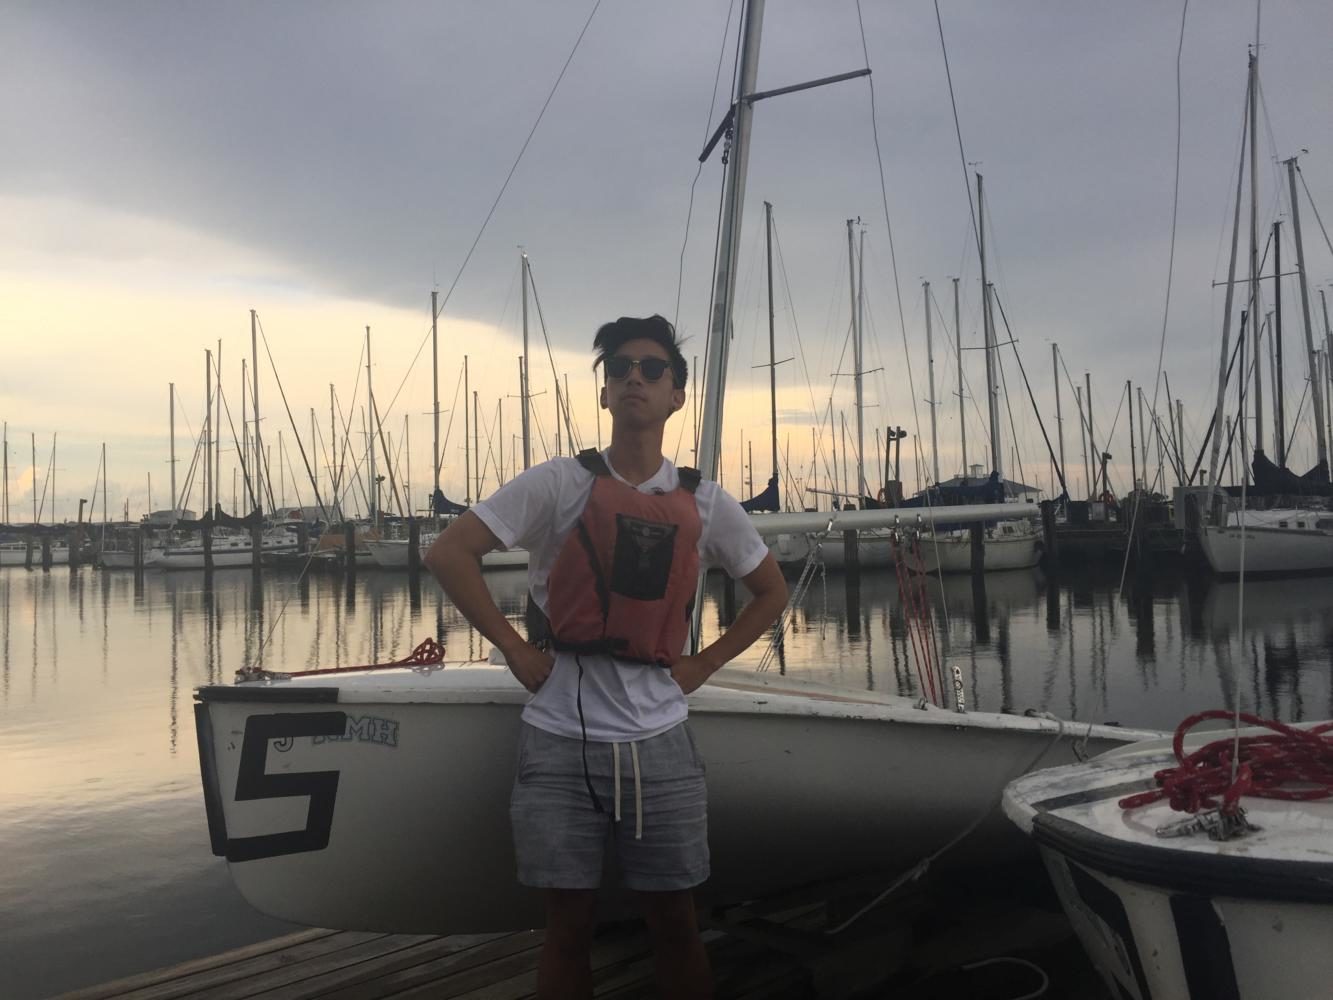 Sports editor JC Canicosa stands in a satirically heroic pose, ready to take on what Lake Pontchartrain throws at him. Photo credit: Sophie Duffy